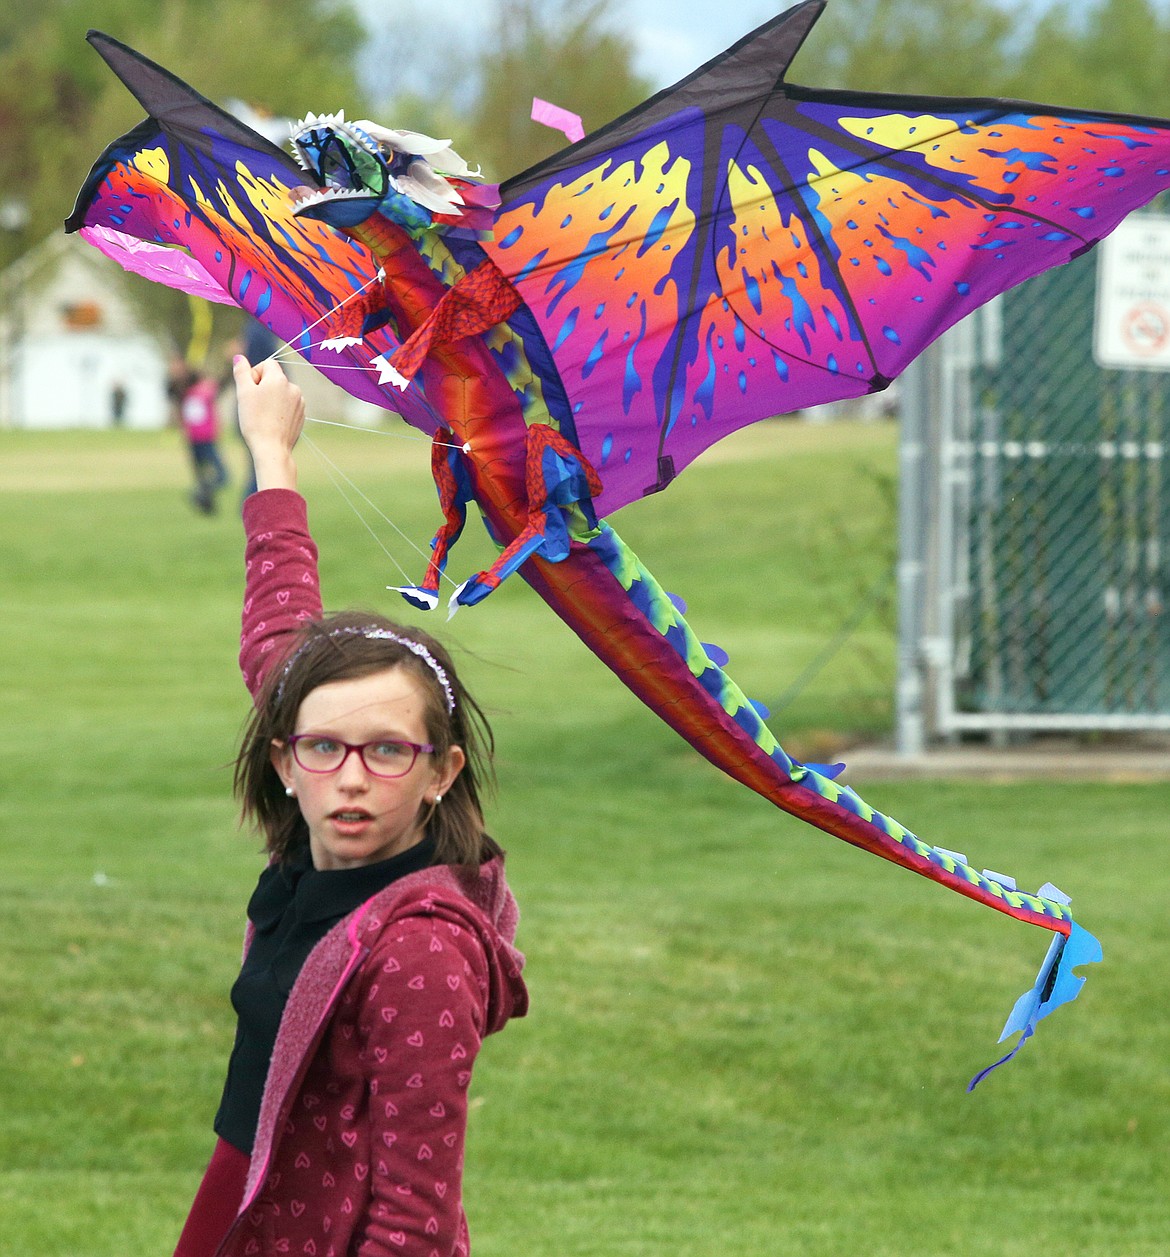 Rhea Buntin took home the Judges' Pick award at the Hayden Kite Festival on Saturday.